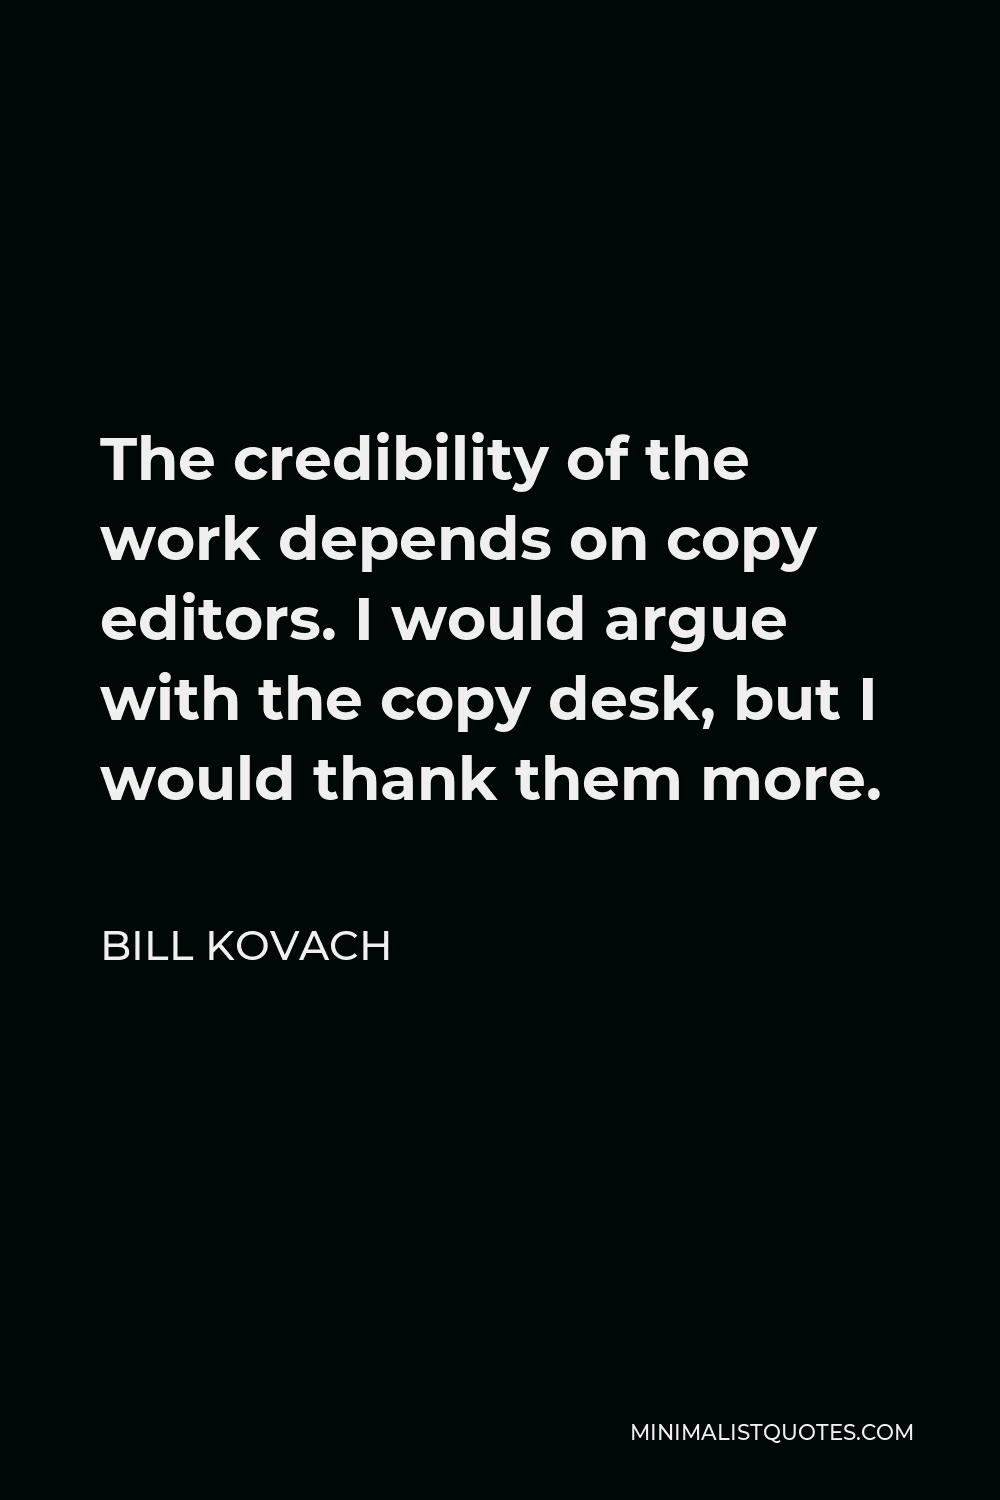 Bill Kovach Quote - The credibility of the work depends on copy editors. I would argue with the copy desk, but I would thank them more.